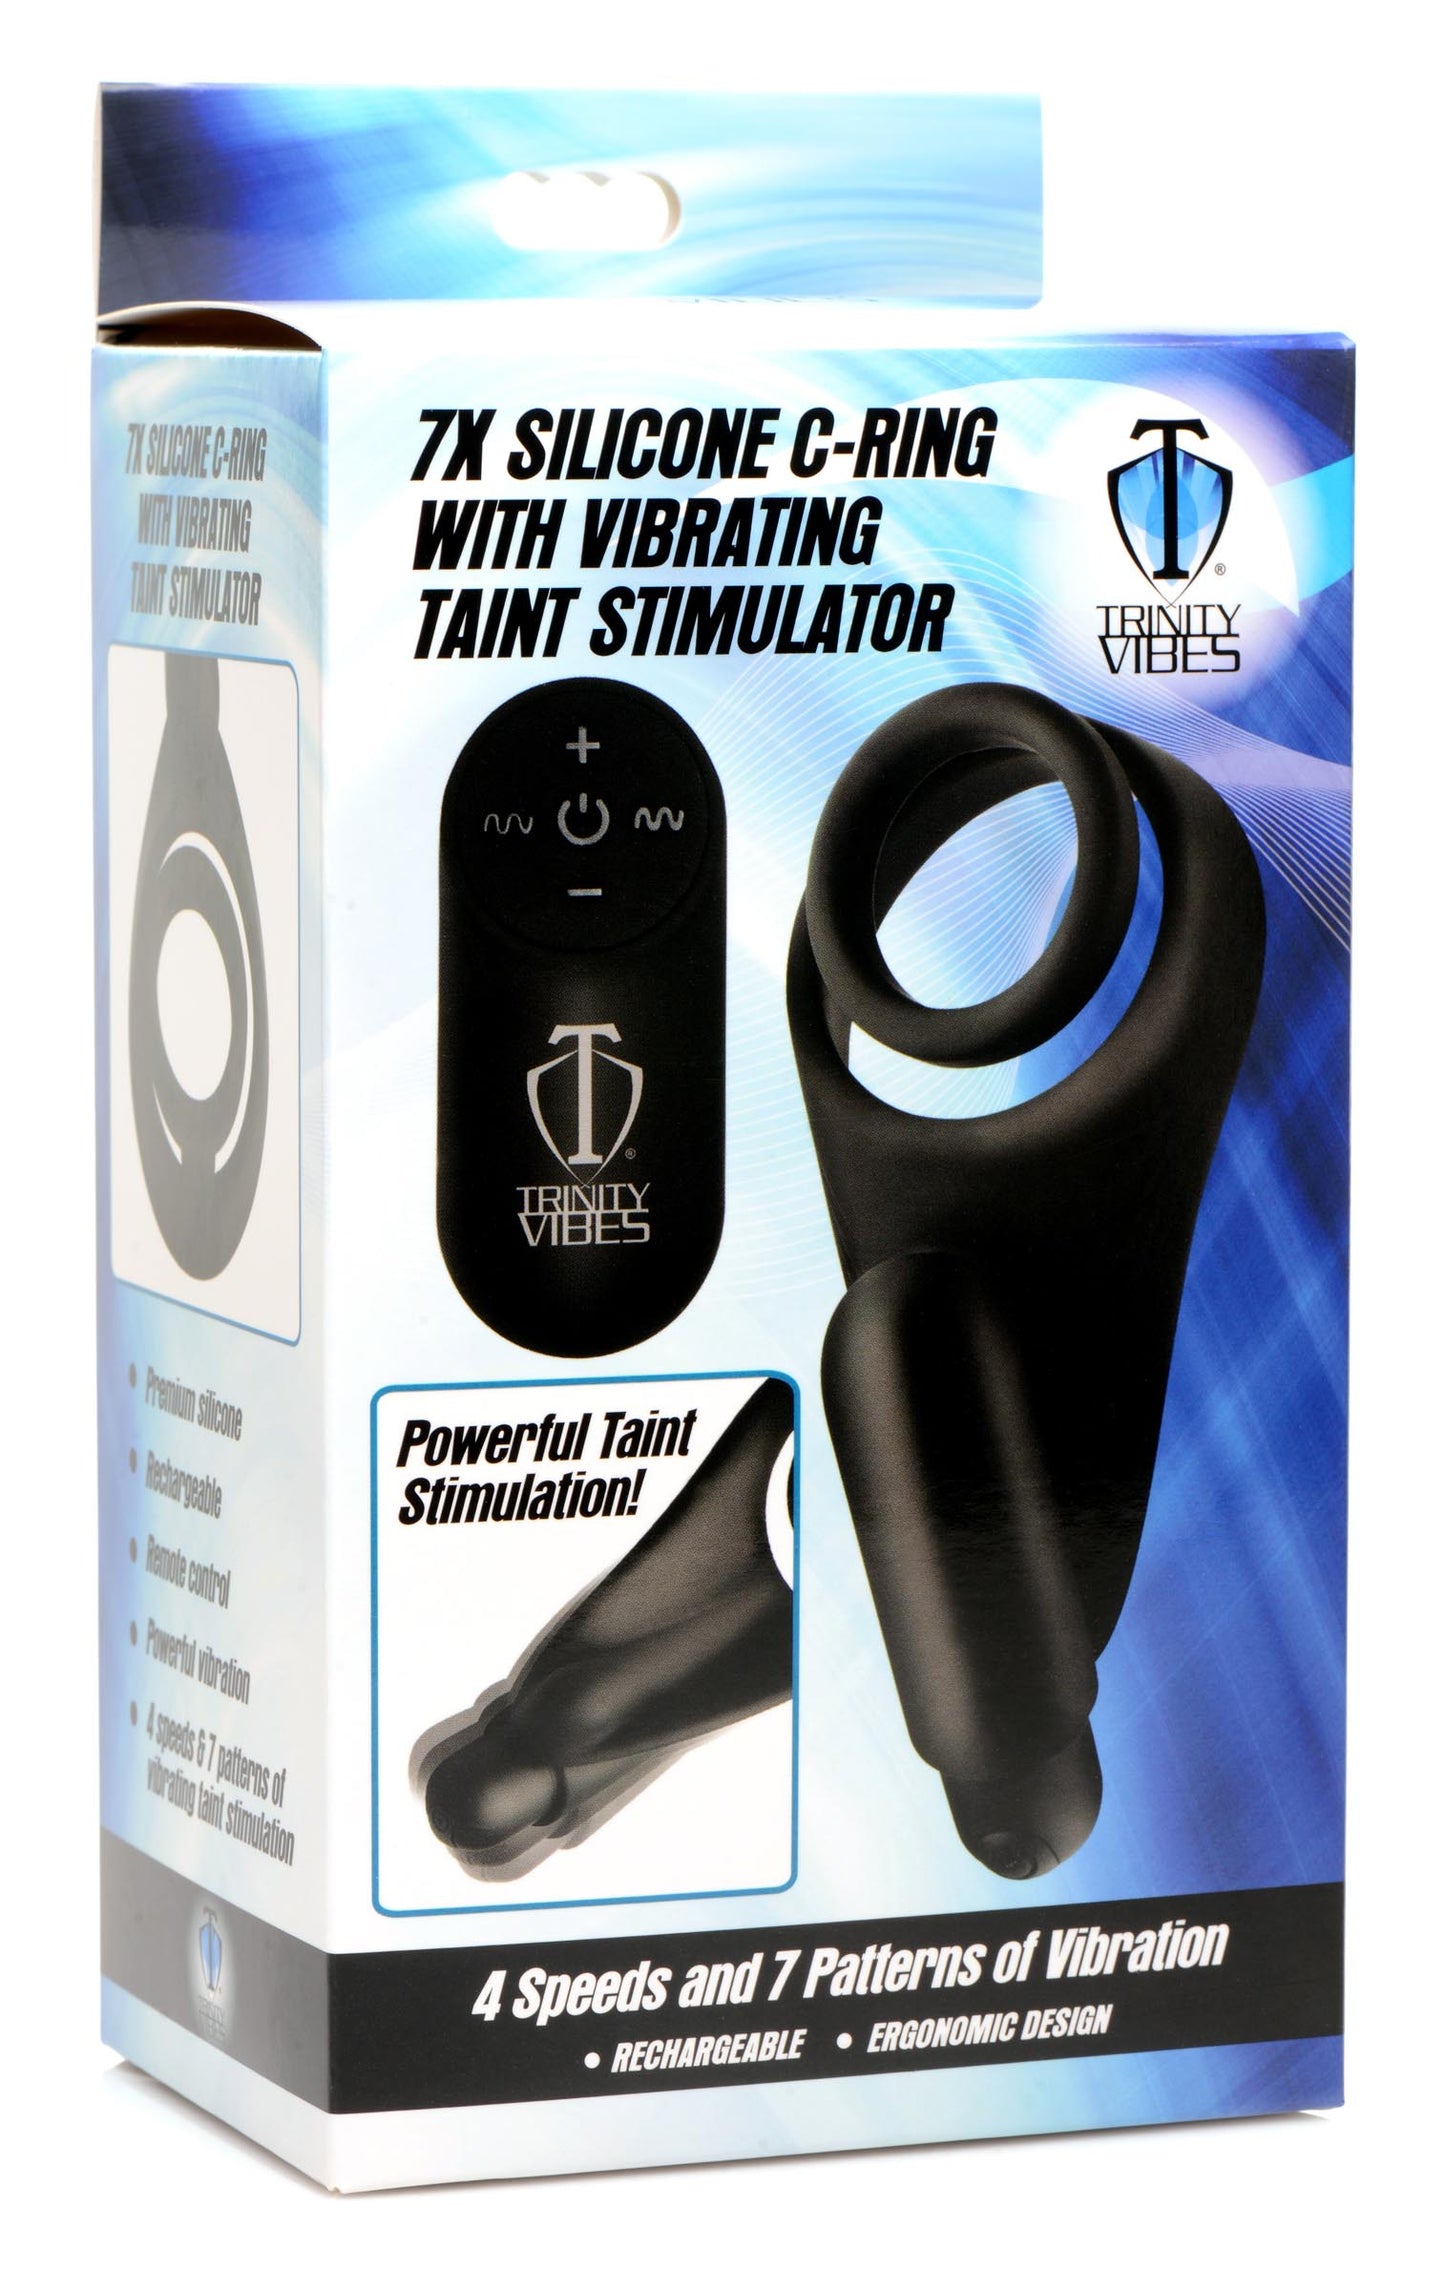 7x Silicone C-ring With Vibrating Taint Stimulator